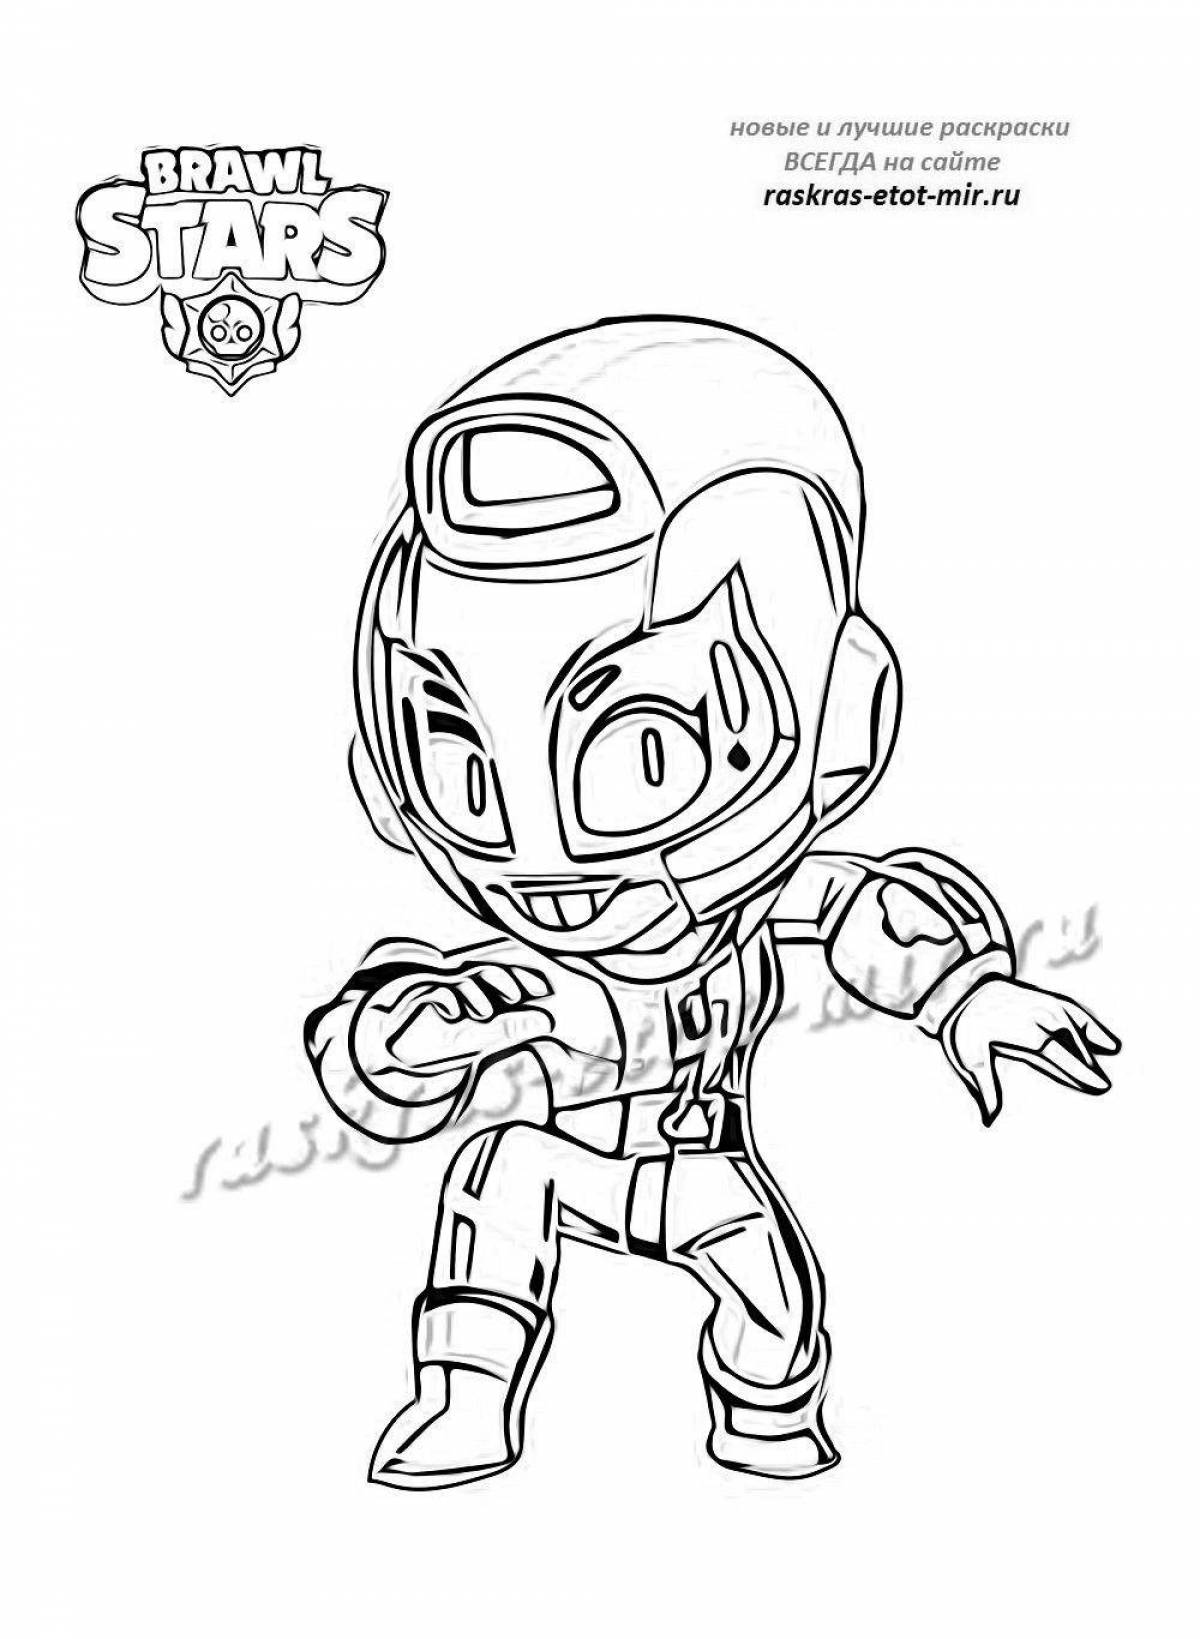 Energetic coloring bravo stars max skin coloring page